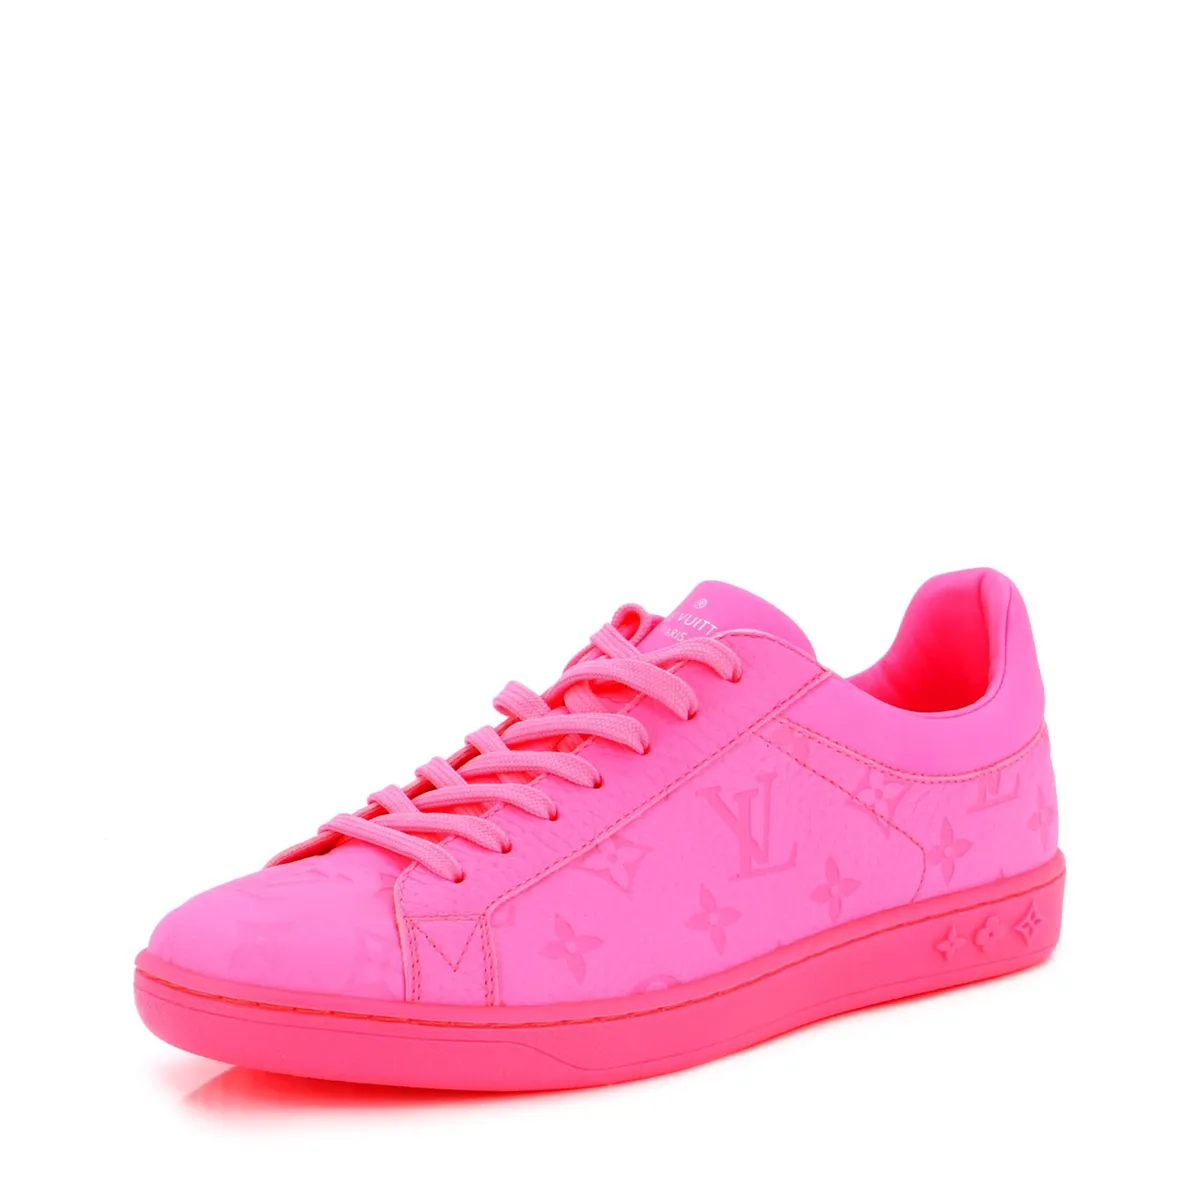 Louis Vuitton Men's Luxembourg Sneakers Monogram Leather Pink